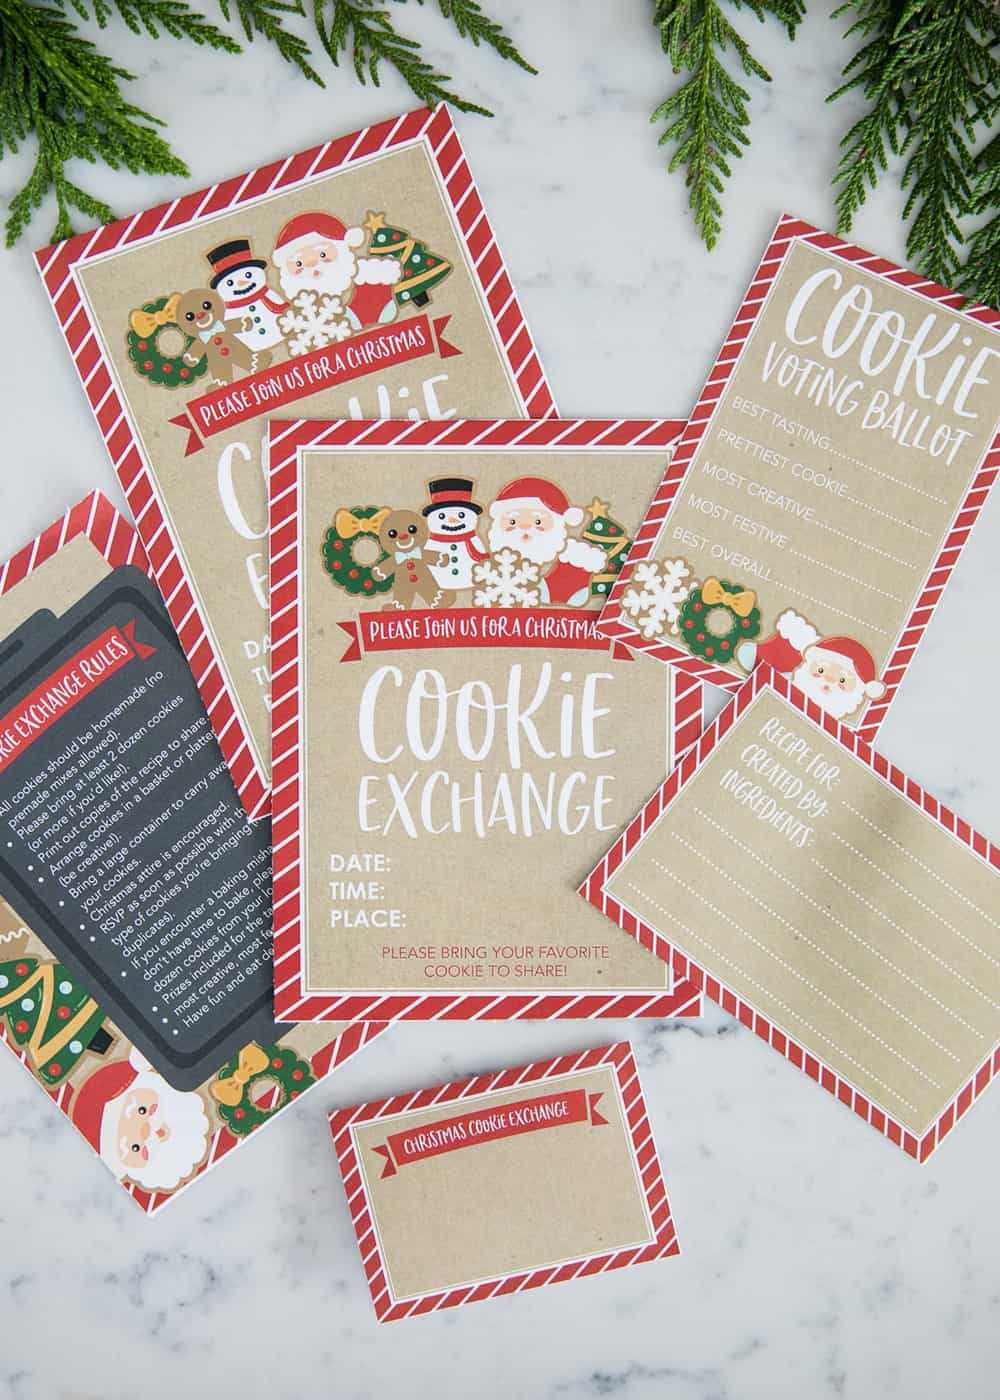 How To Host A Cookie Exchange (W/ Free Printables!) - I Throughout Cookie Exchange Recipe Card Template